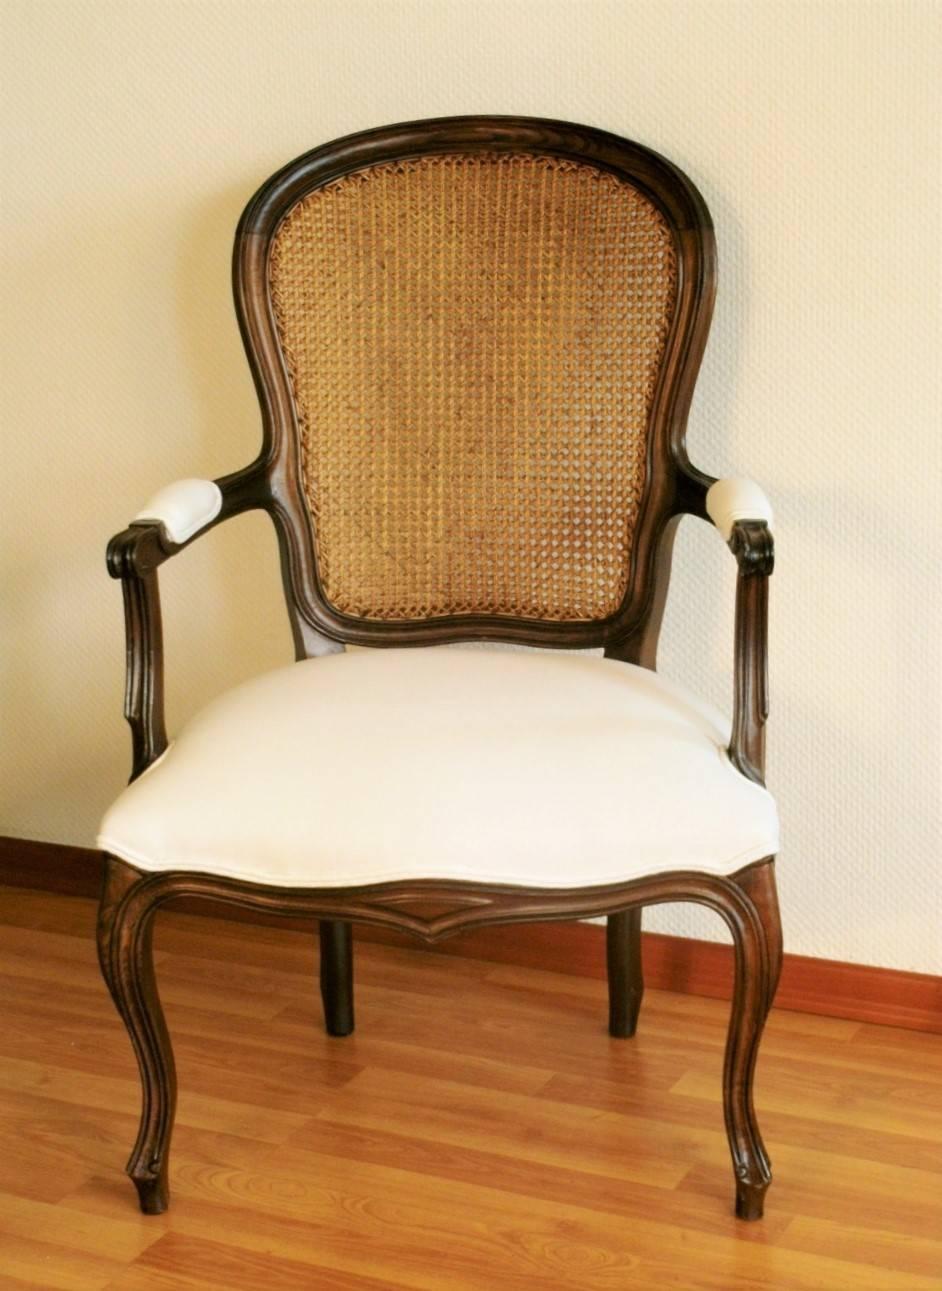 A Louis XVI style cabriolet armchair of solid walnut finely carved with caned backrest, France, 1900-1910. The chair has been reupholstered in off-white 100% linen, original finish very well preserved.
Dimensions:
Width 24.50”, depth 21.50”,